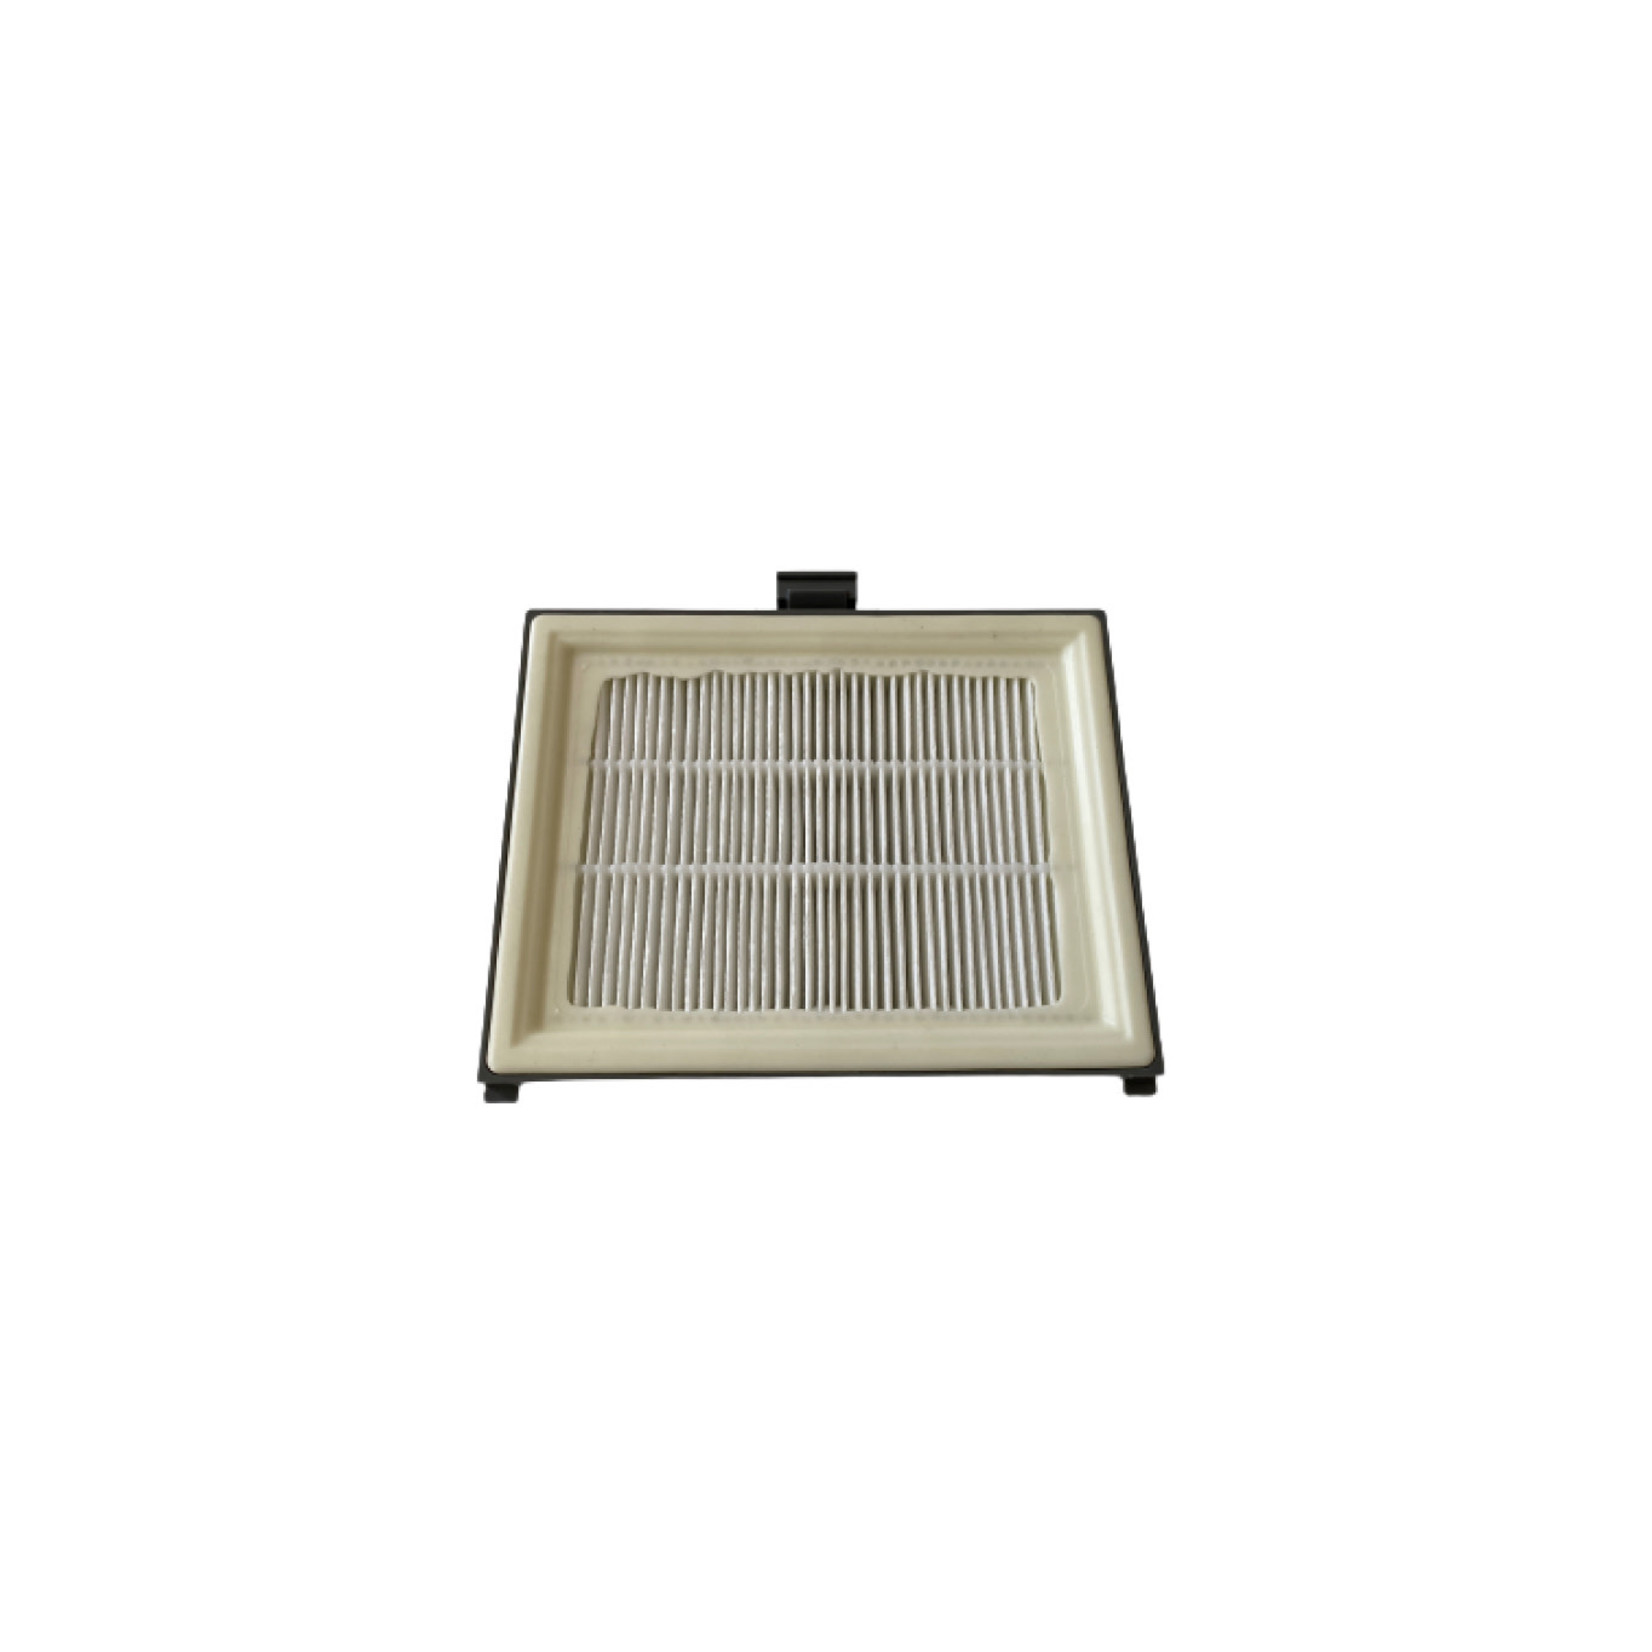 Lindhaus Lindhaus S-Class H13 HEPA Filter for Healthcare Pro